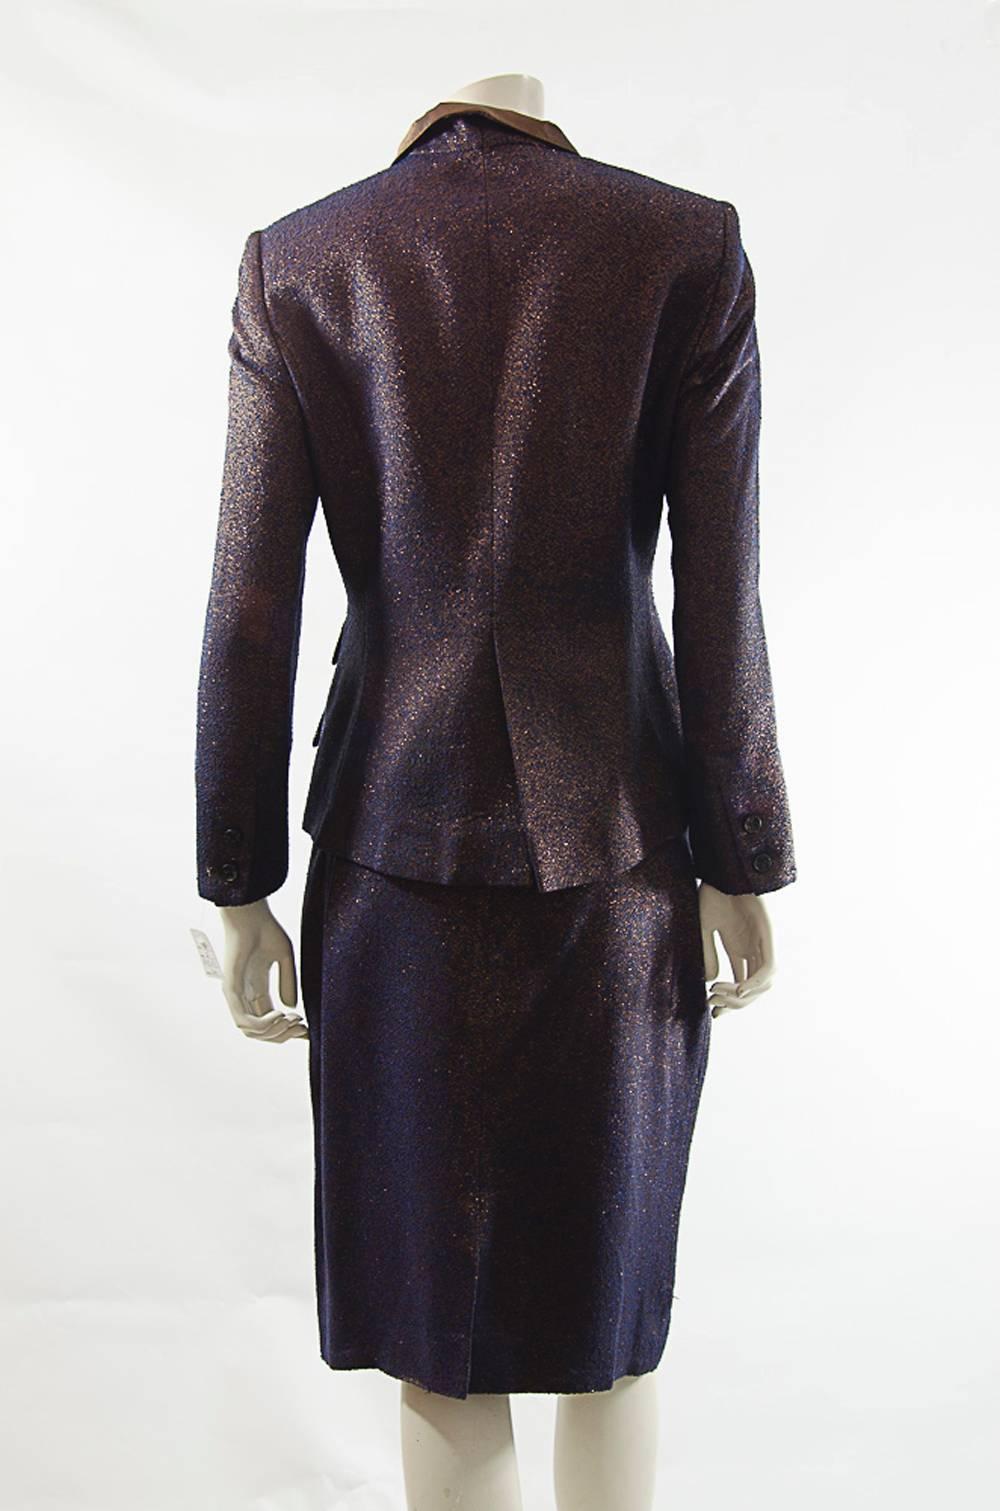 Nina Ricci  Haute Boutique Evening Metallic Skirt Suit In Excellent Condition For Sale In New York, NY